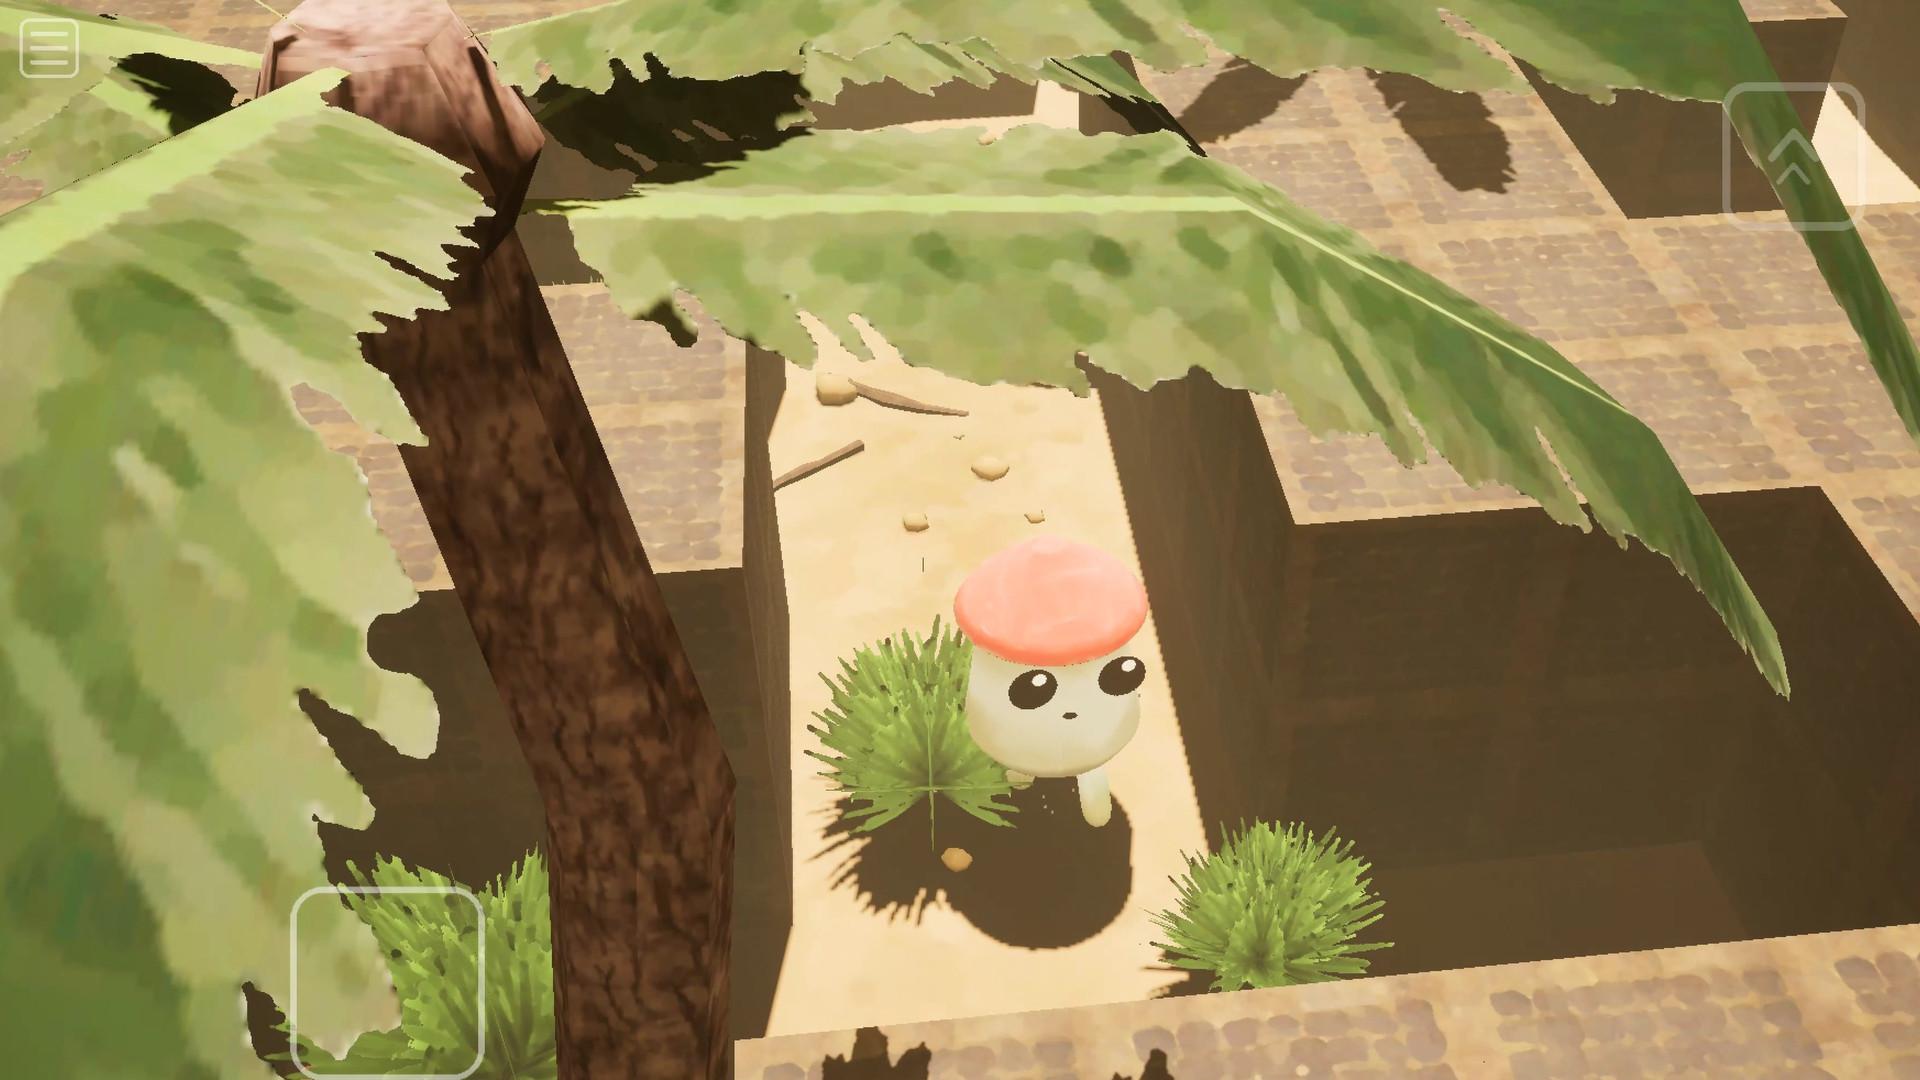 3D Maze: POKO's Adventures for Android - APK Download